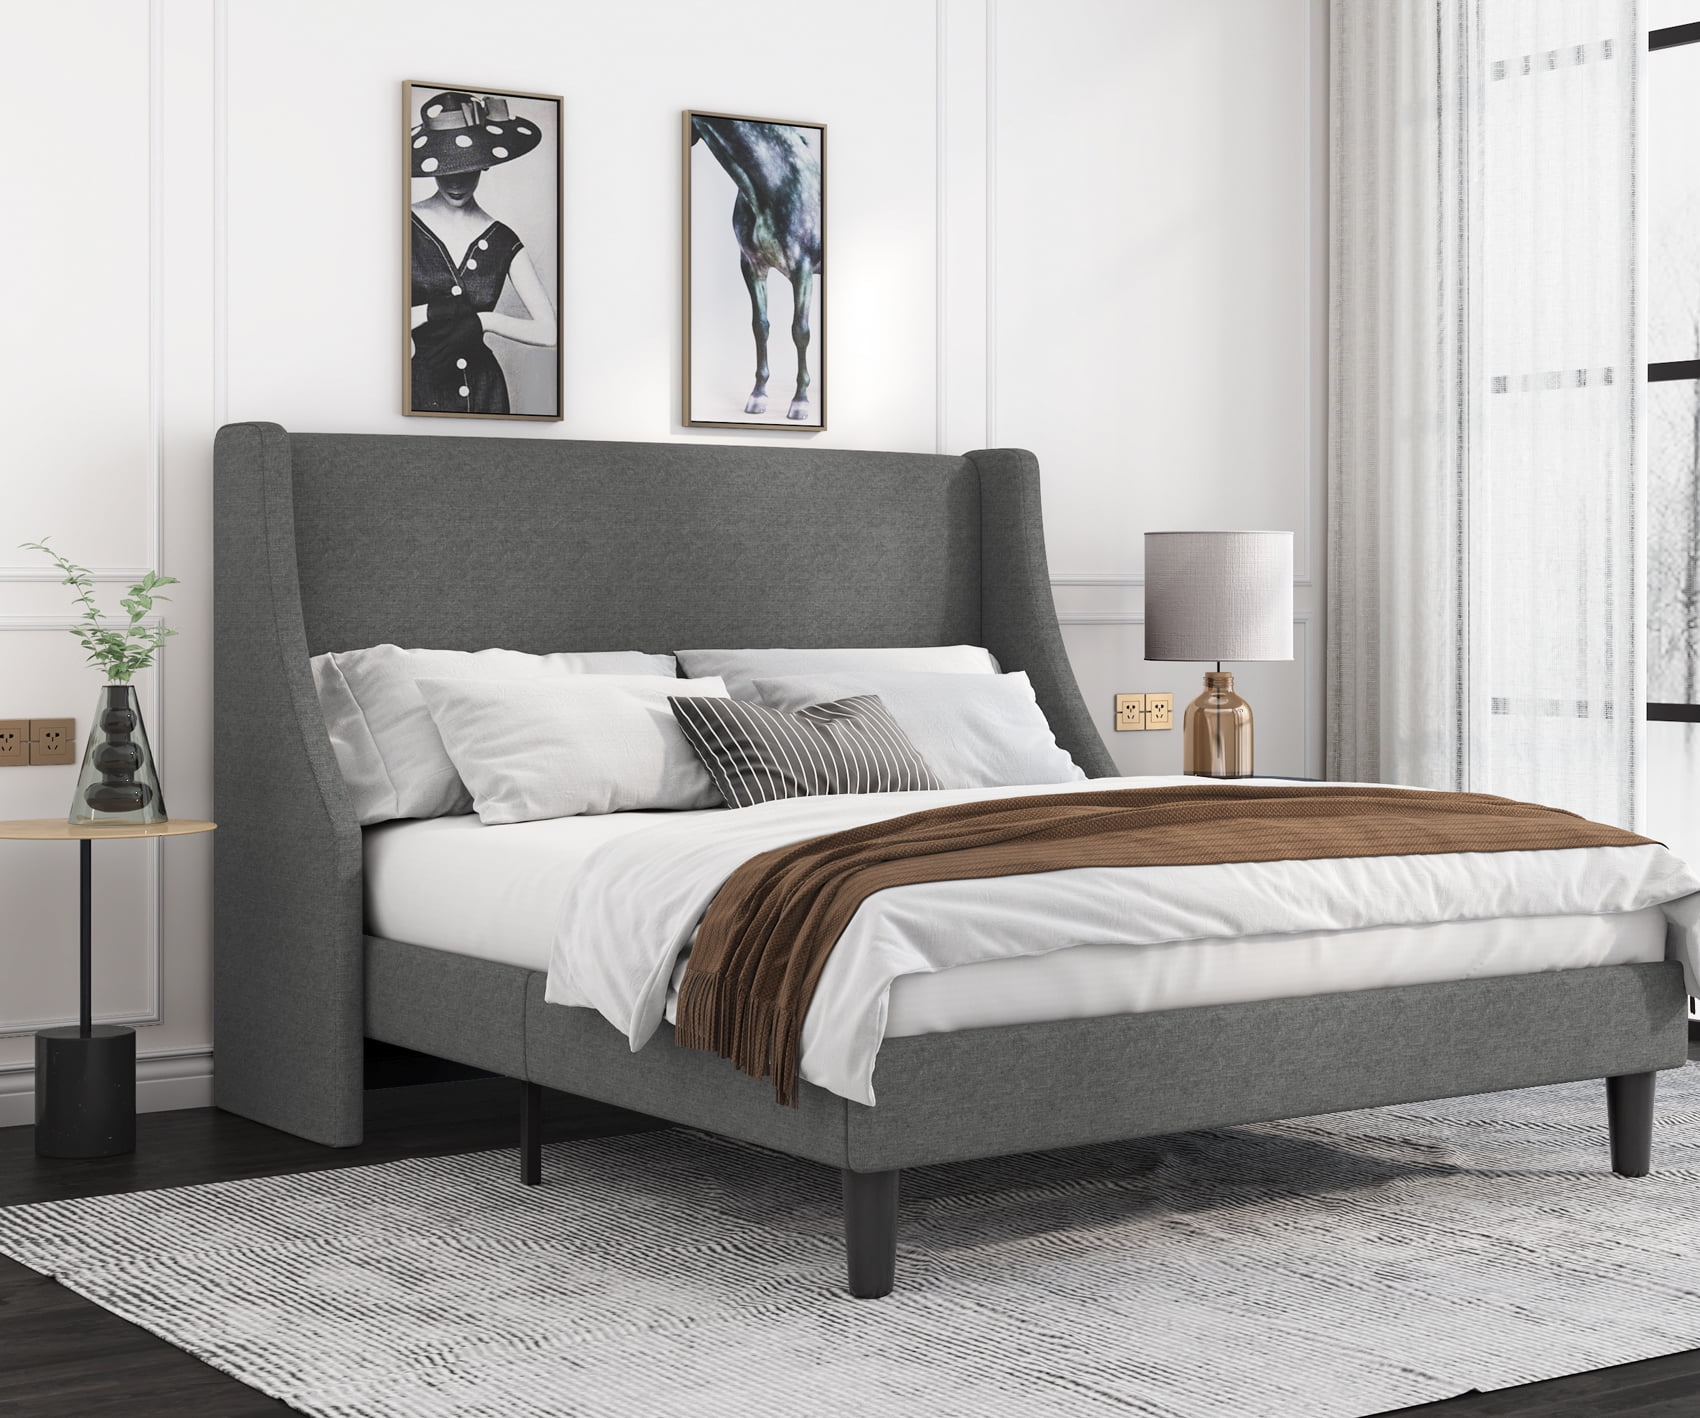 Allewie Queen Size Fabric Upholstered Platform Bed Frame with Wingback